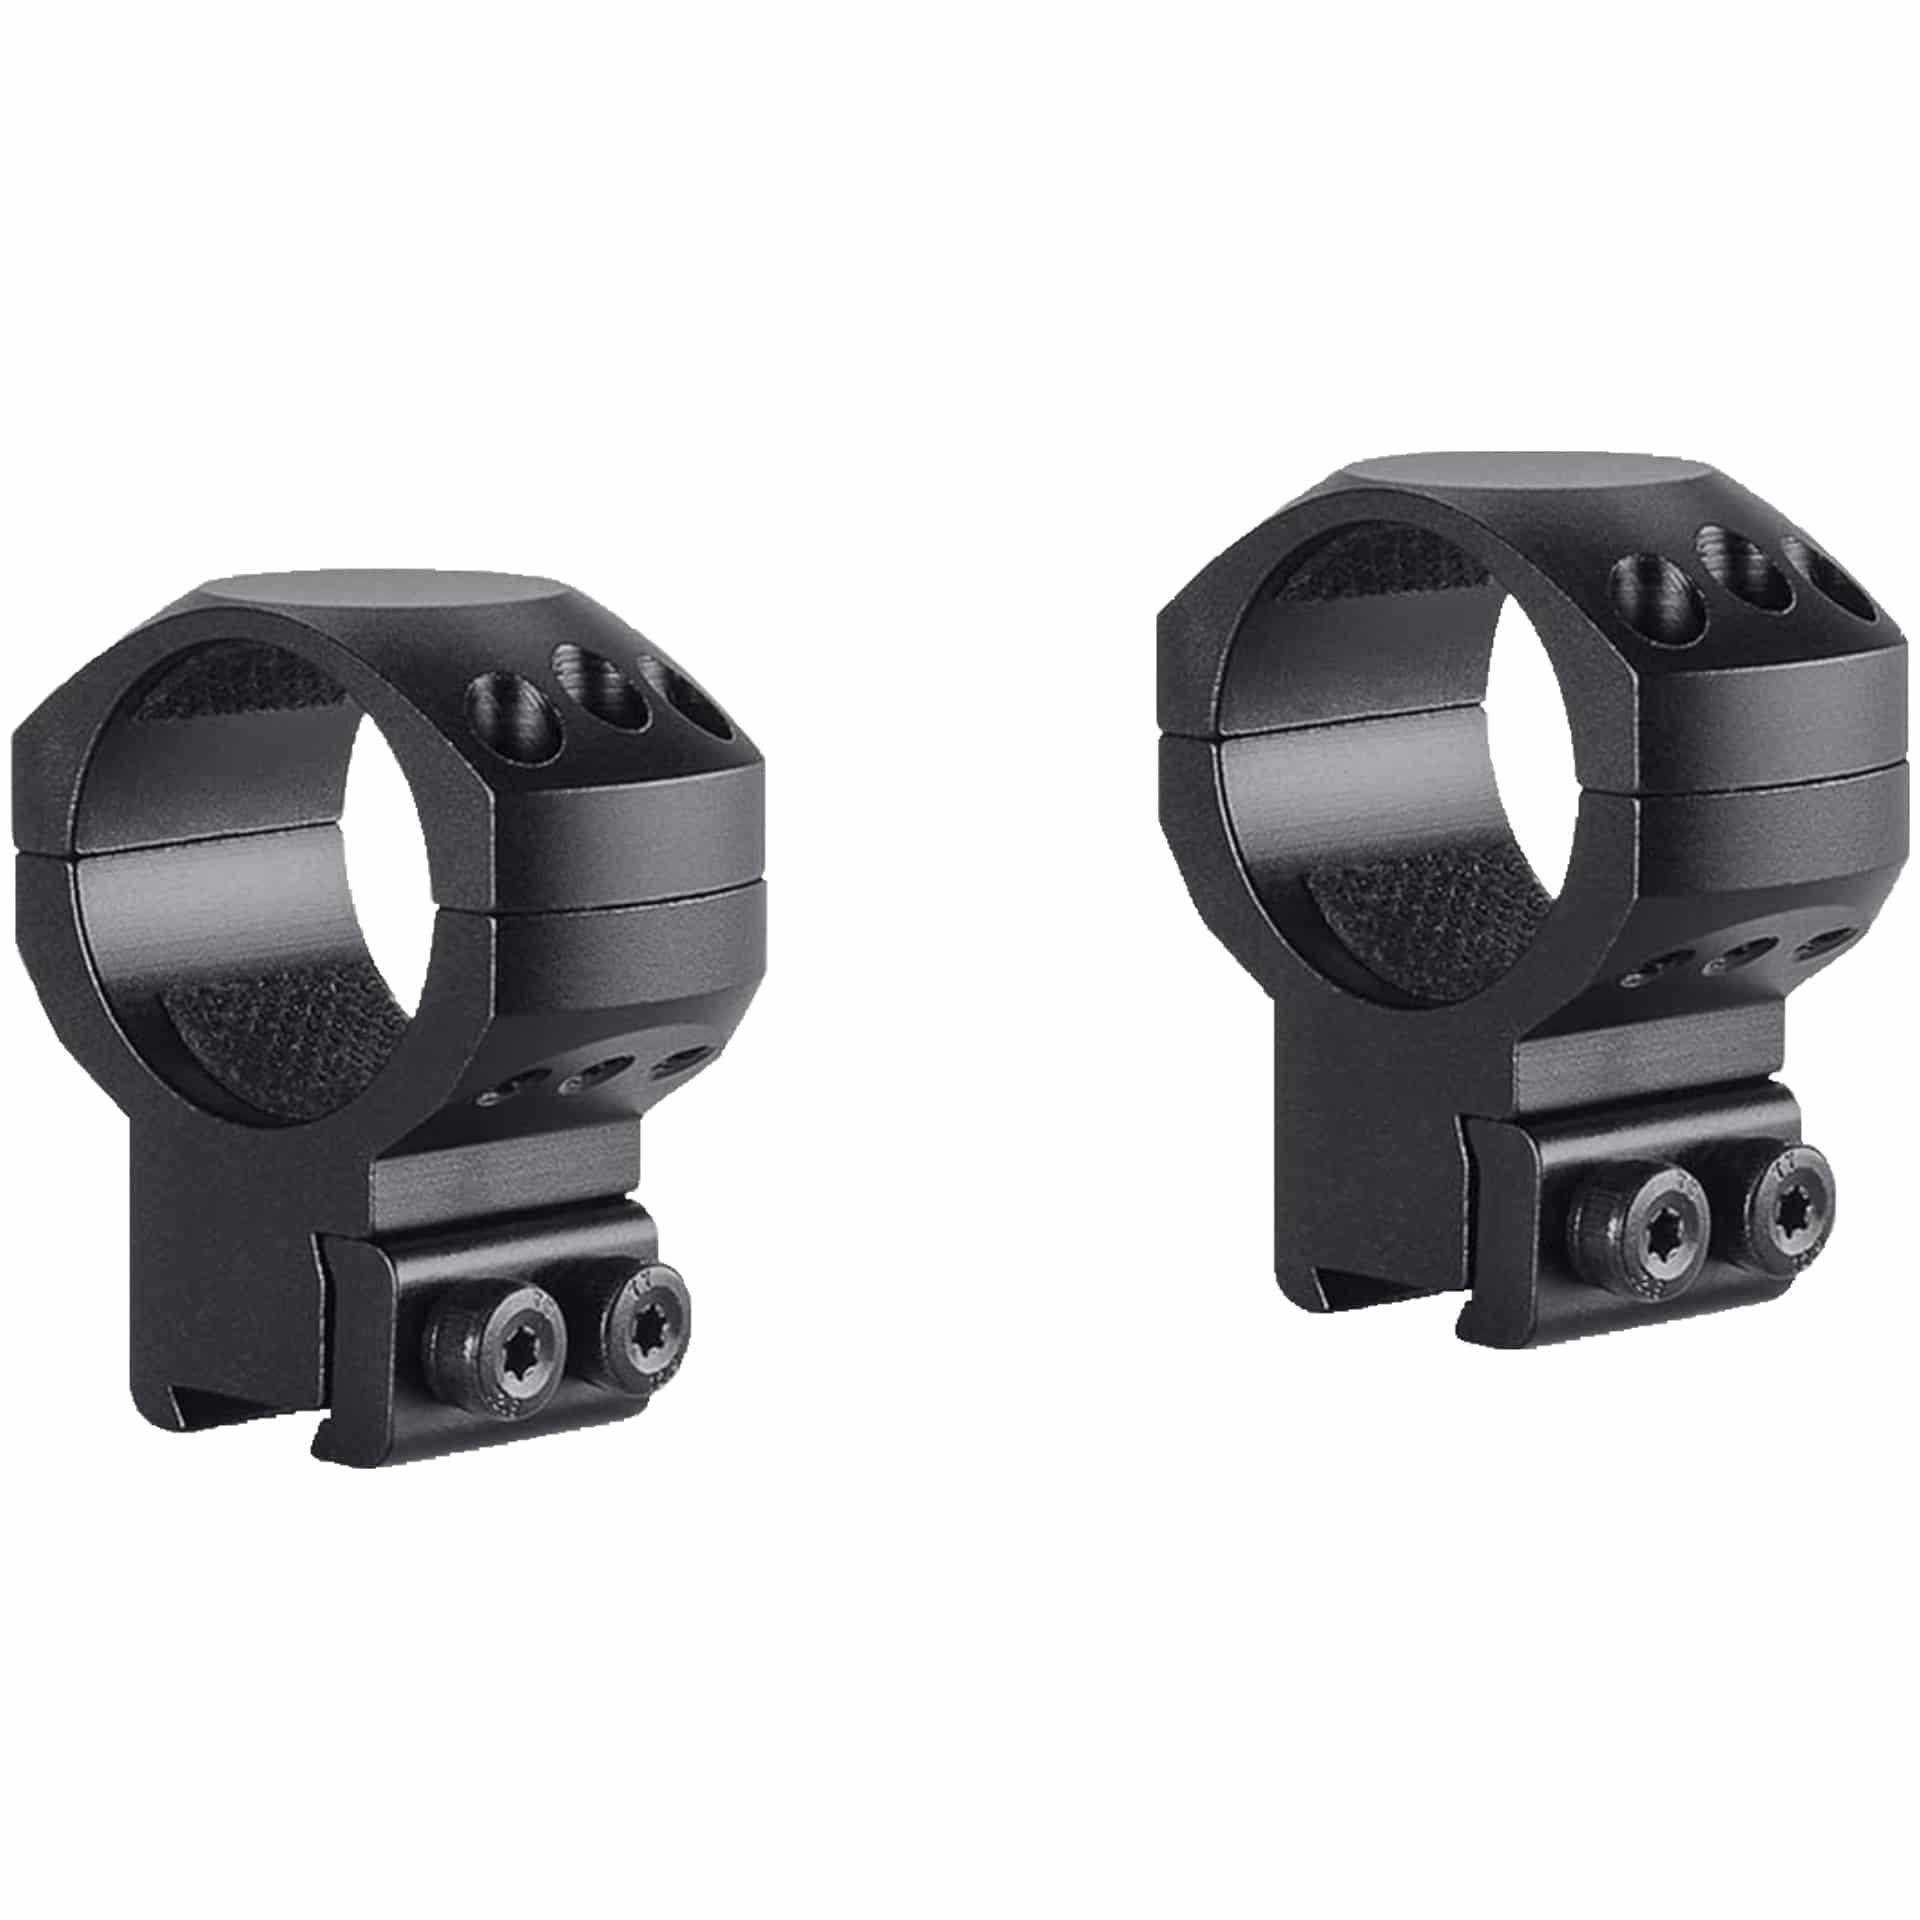 Tactical Ring Mounts 9-11mm, 30mm, High